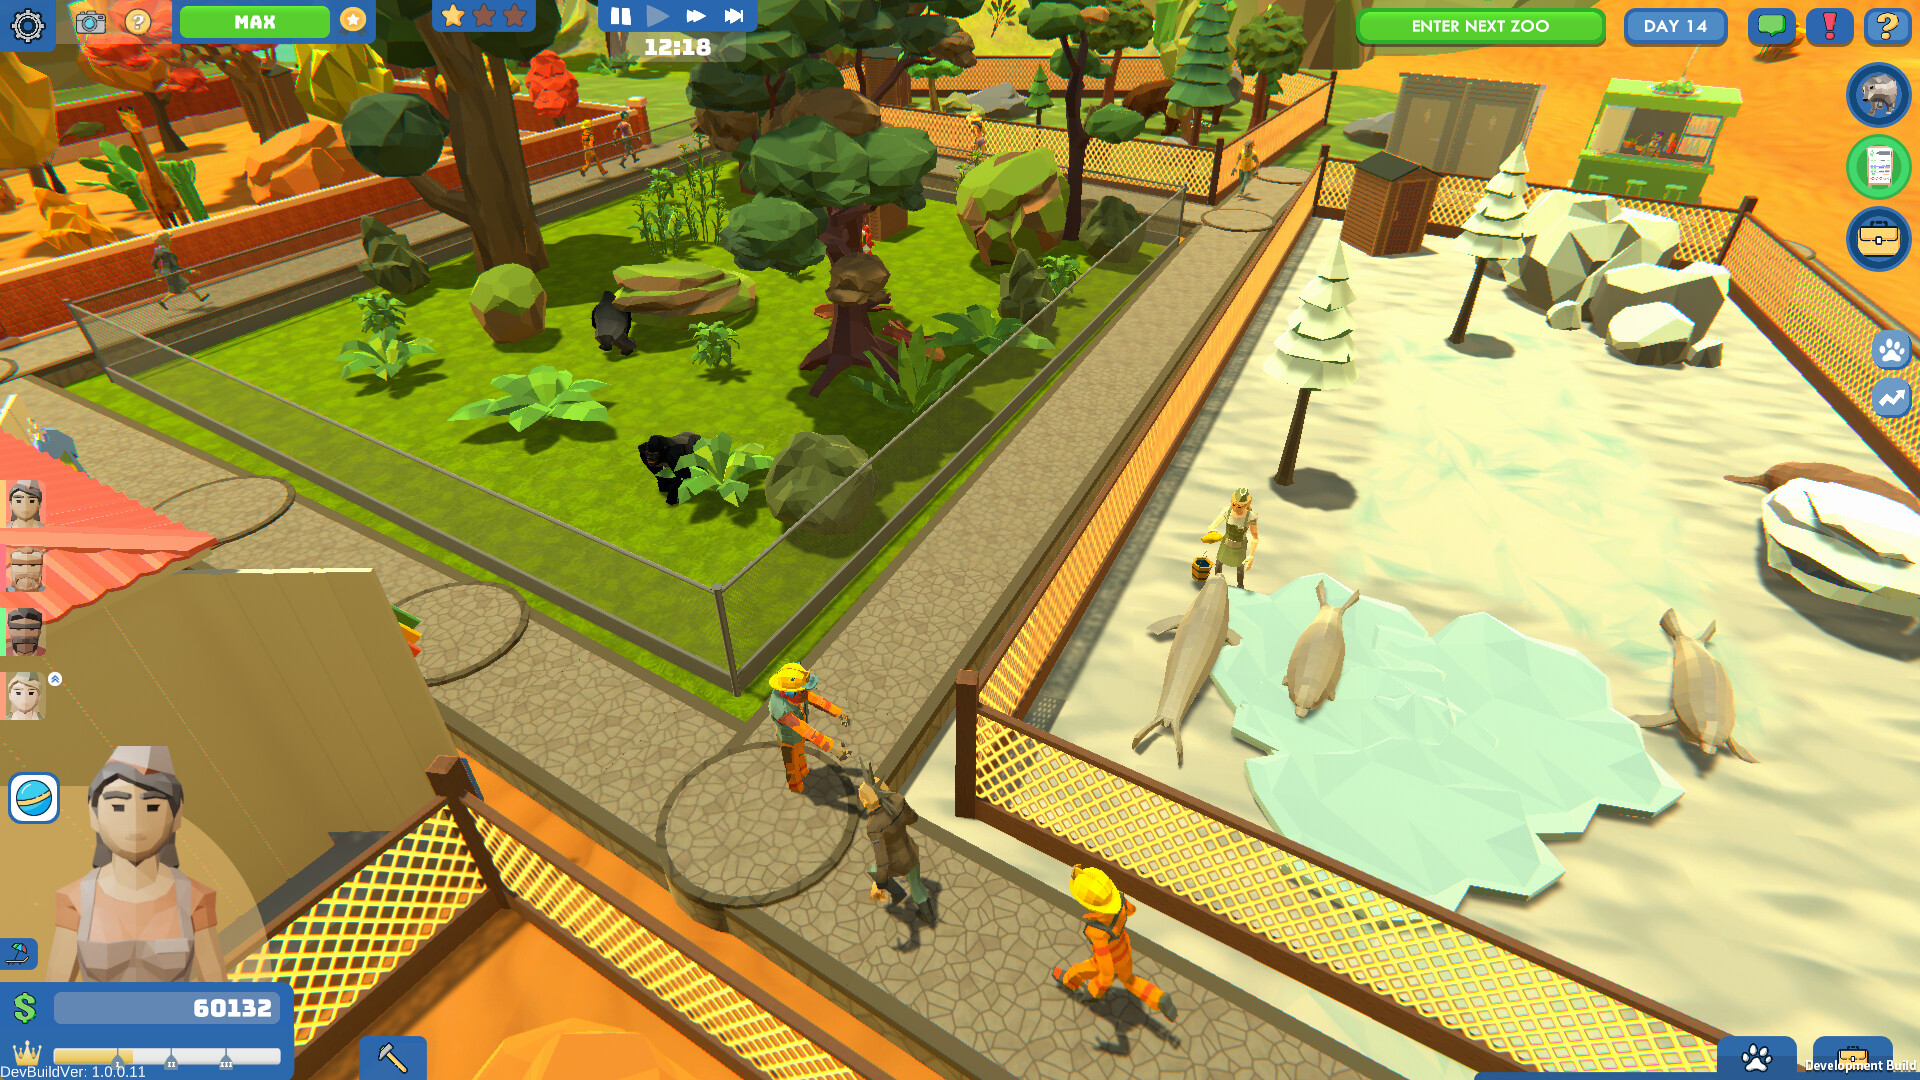 ZooKeeper Free Download